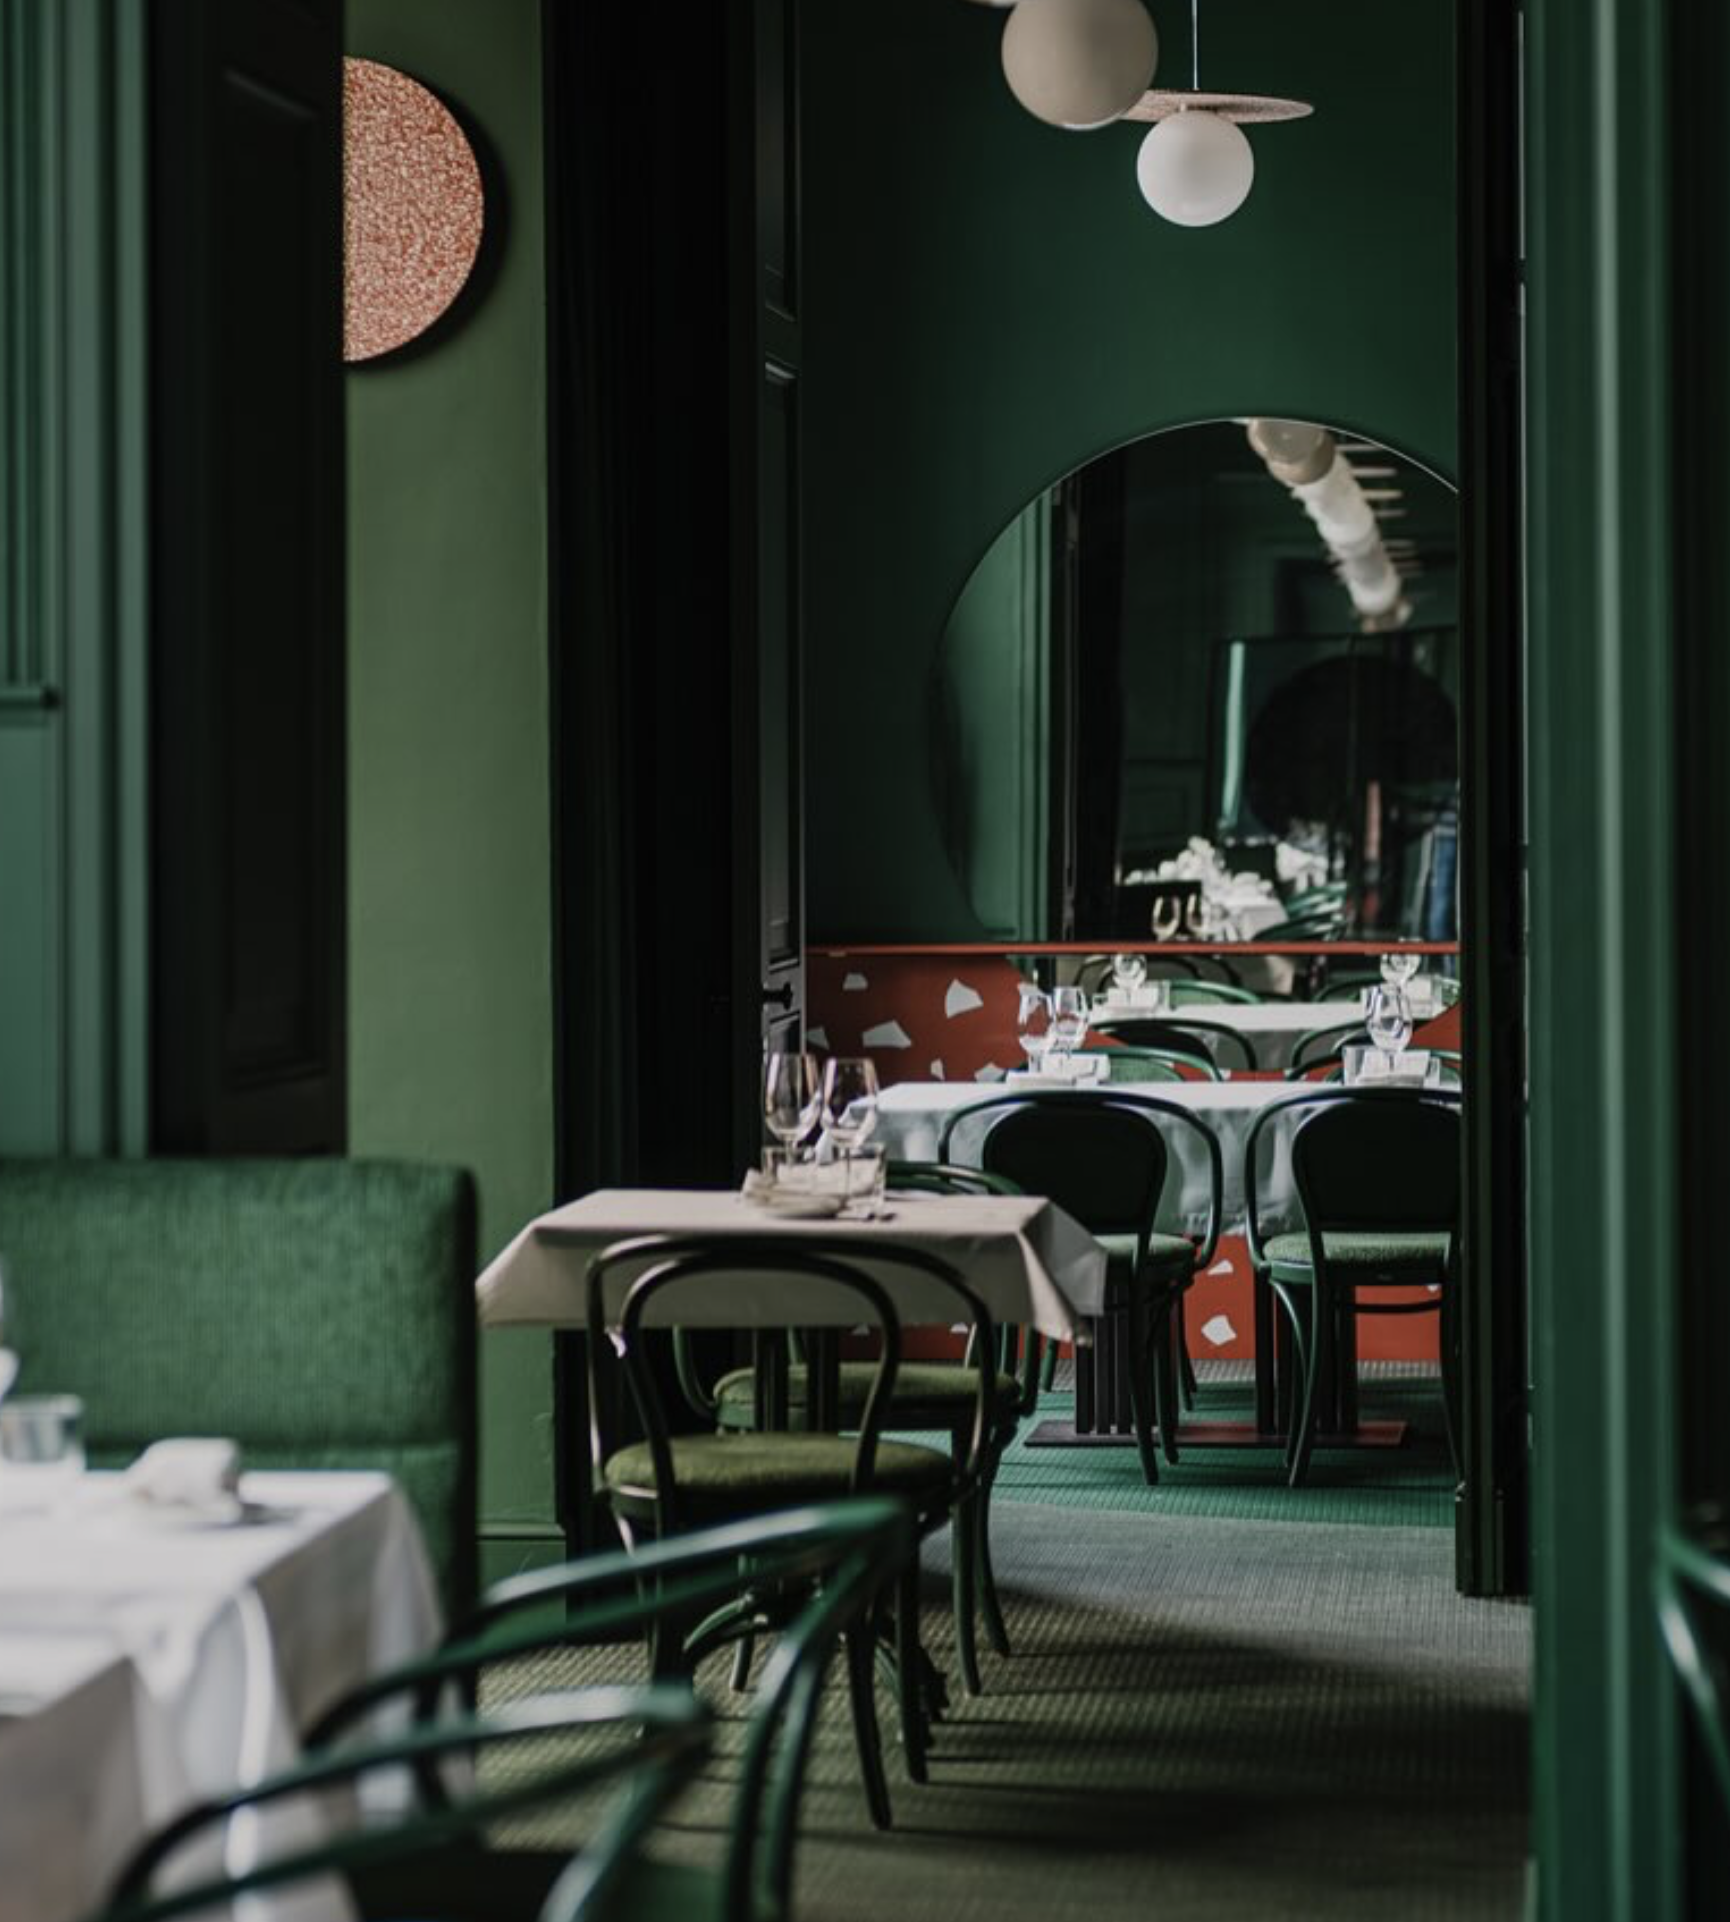 Le Braci offers high-end Italian cuisine in the heart of Warsaw. Photo by Le Braci